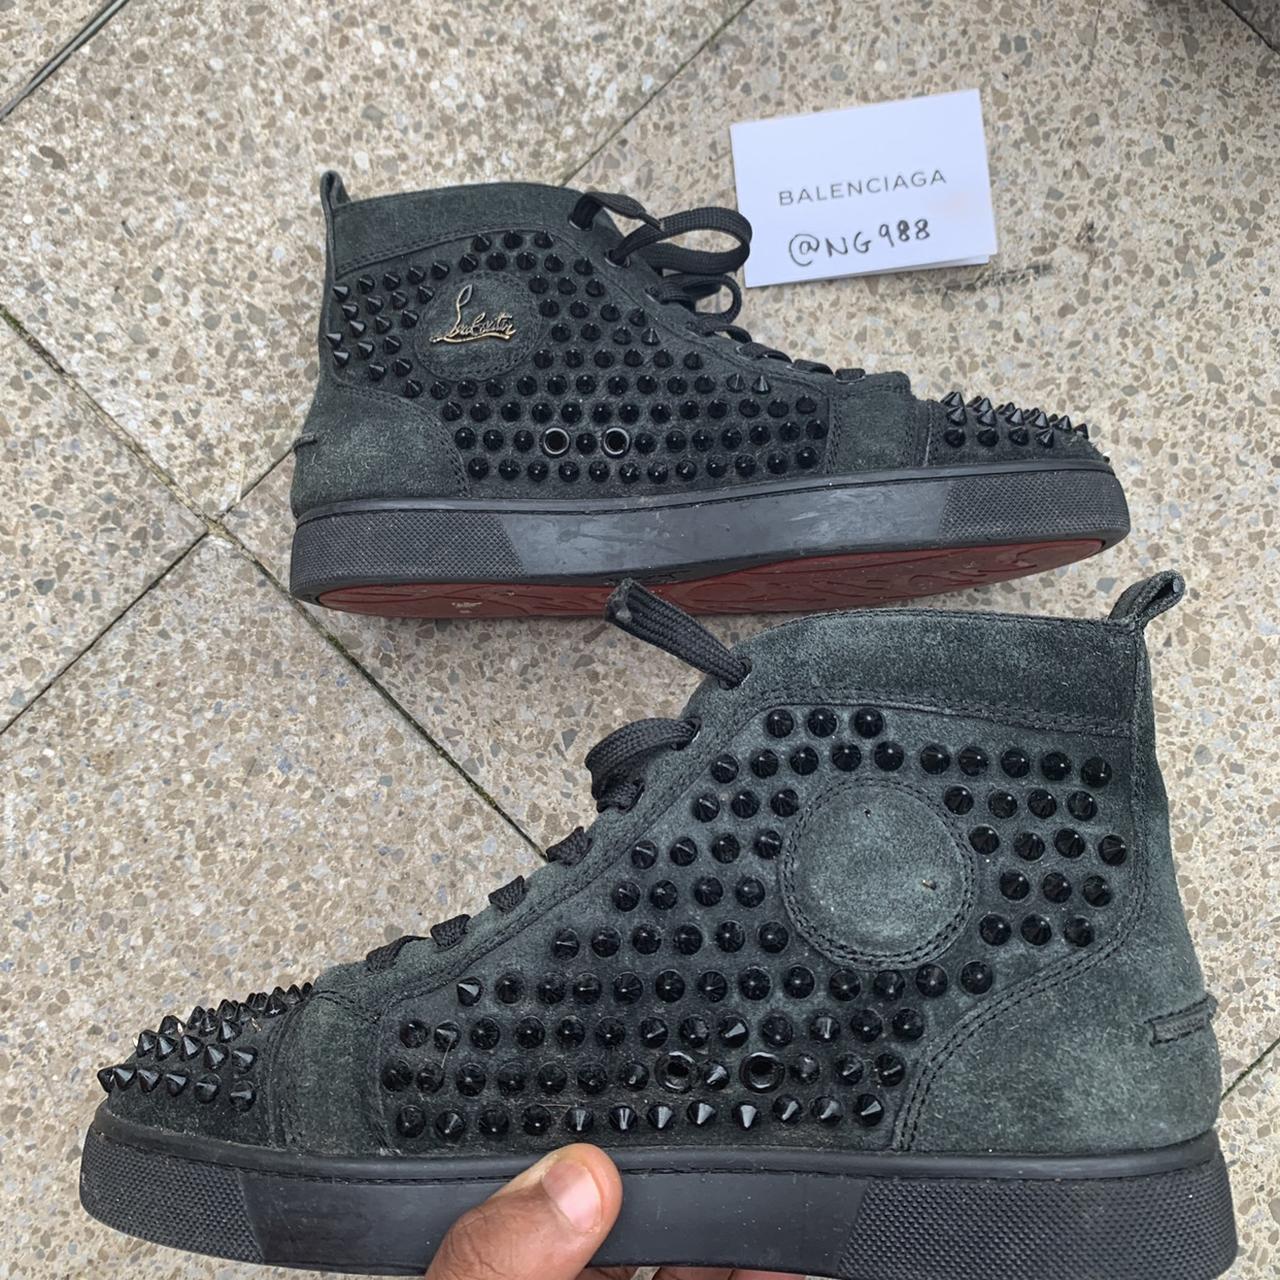 Christian Louboutin Men’s High Top Spikes , No box or